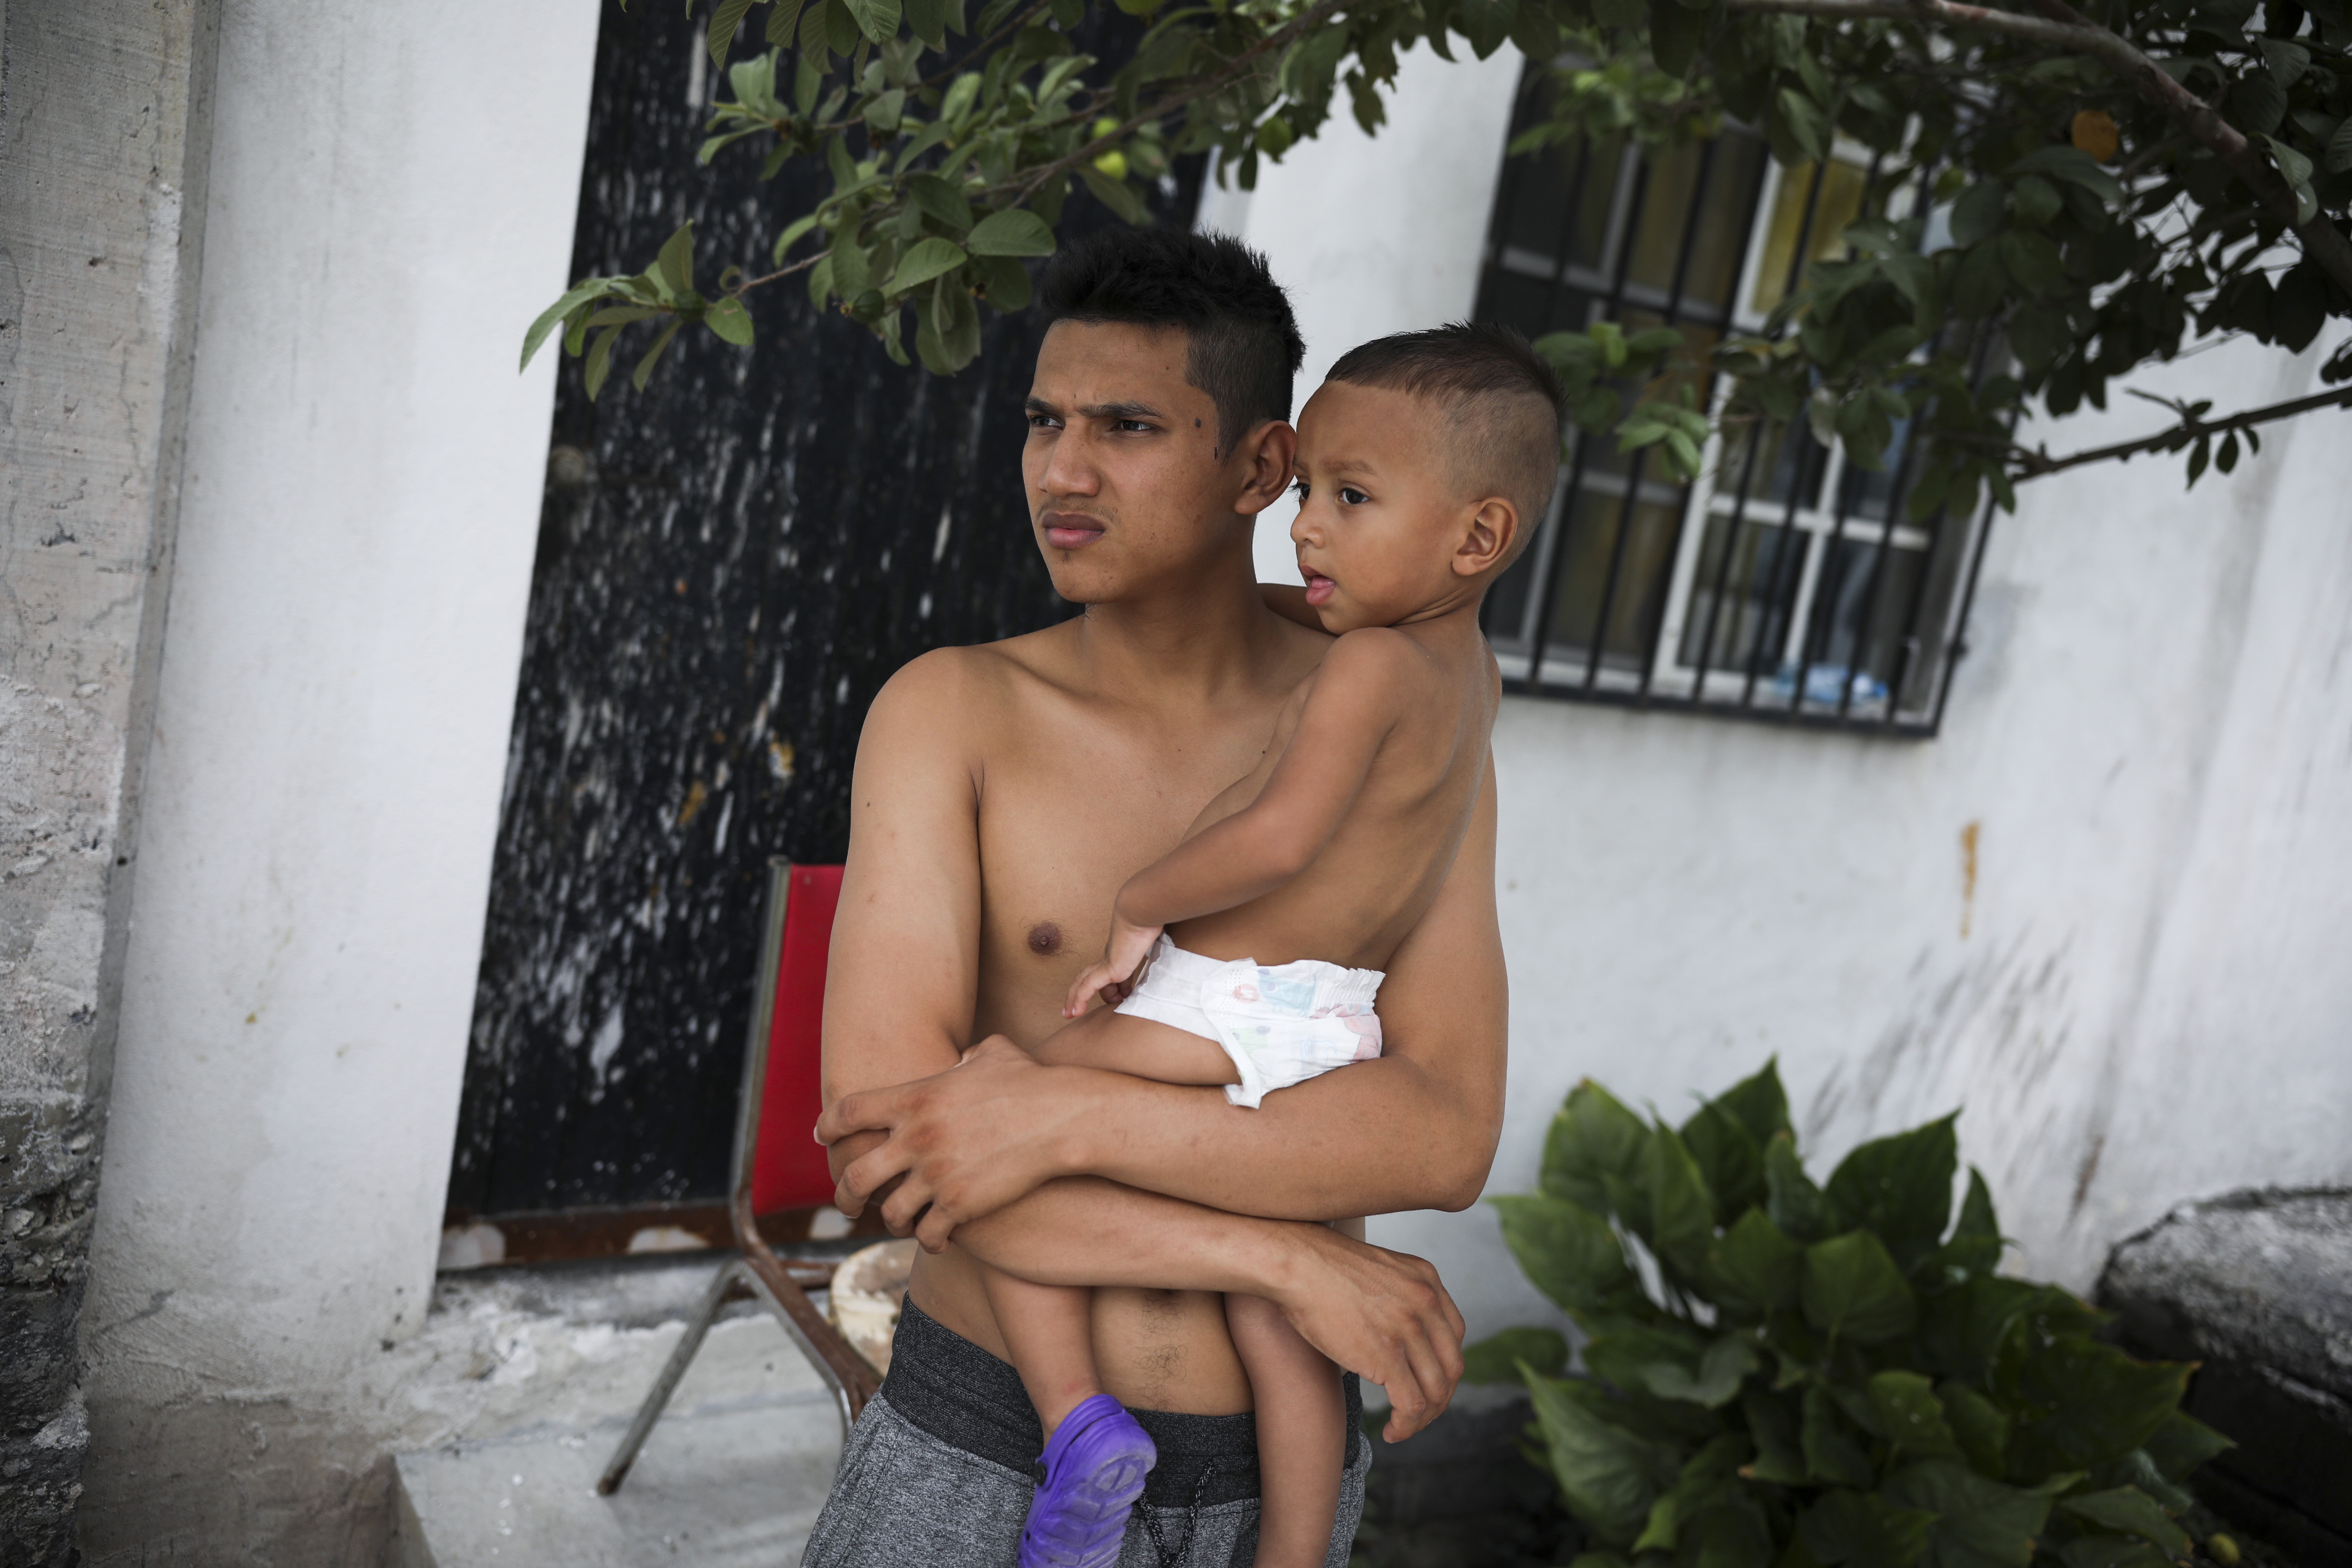 Gerardo, a 23-year-old migrant from Honduras who did not want to give his last name, holds his son Orlando outside the Viento Recio church, which is serving as a migrant shelter, in Matamoros, Mexico, Thursday, Aug. 1, 2019, on the border with Brownsville, Texas. Some migrants are waiting for their names to be called from a list more than 1,000 names long to apply for asylum in the U.S. while others have recently been returned and are awaiting court dates. (AP Photo/Emilio Espejel)